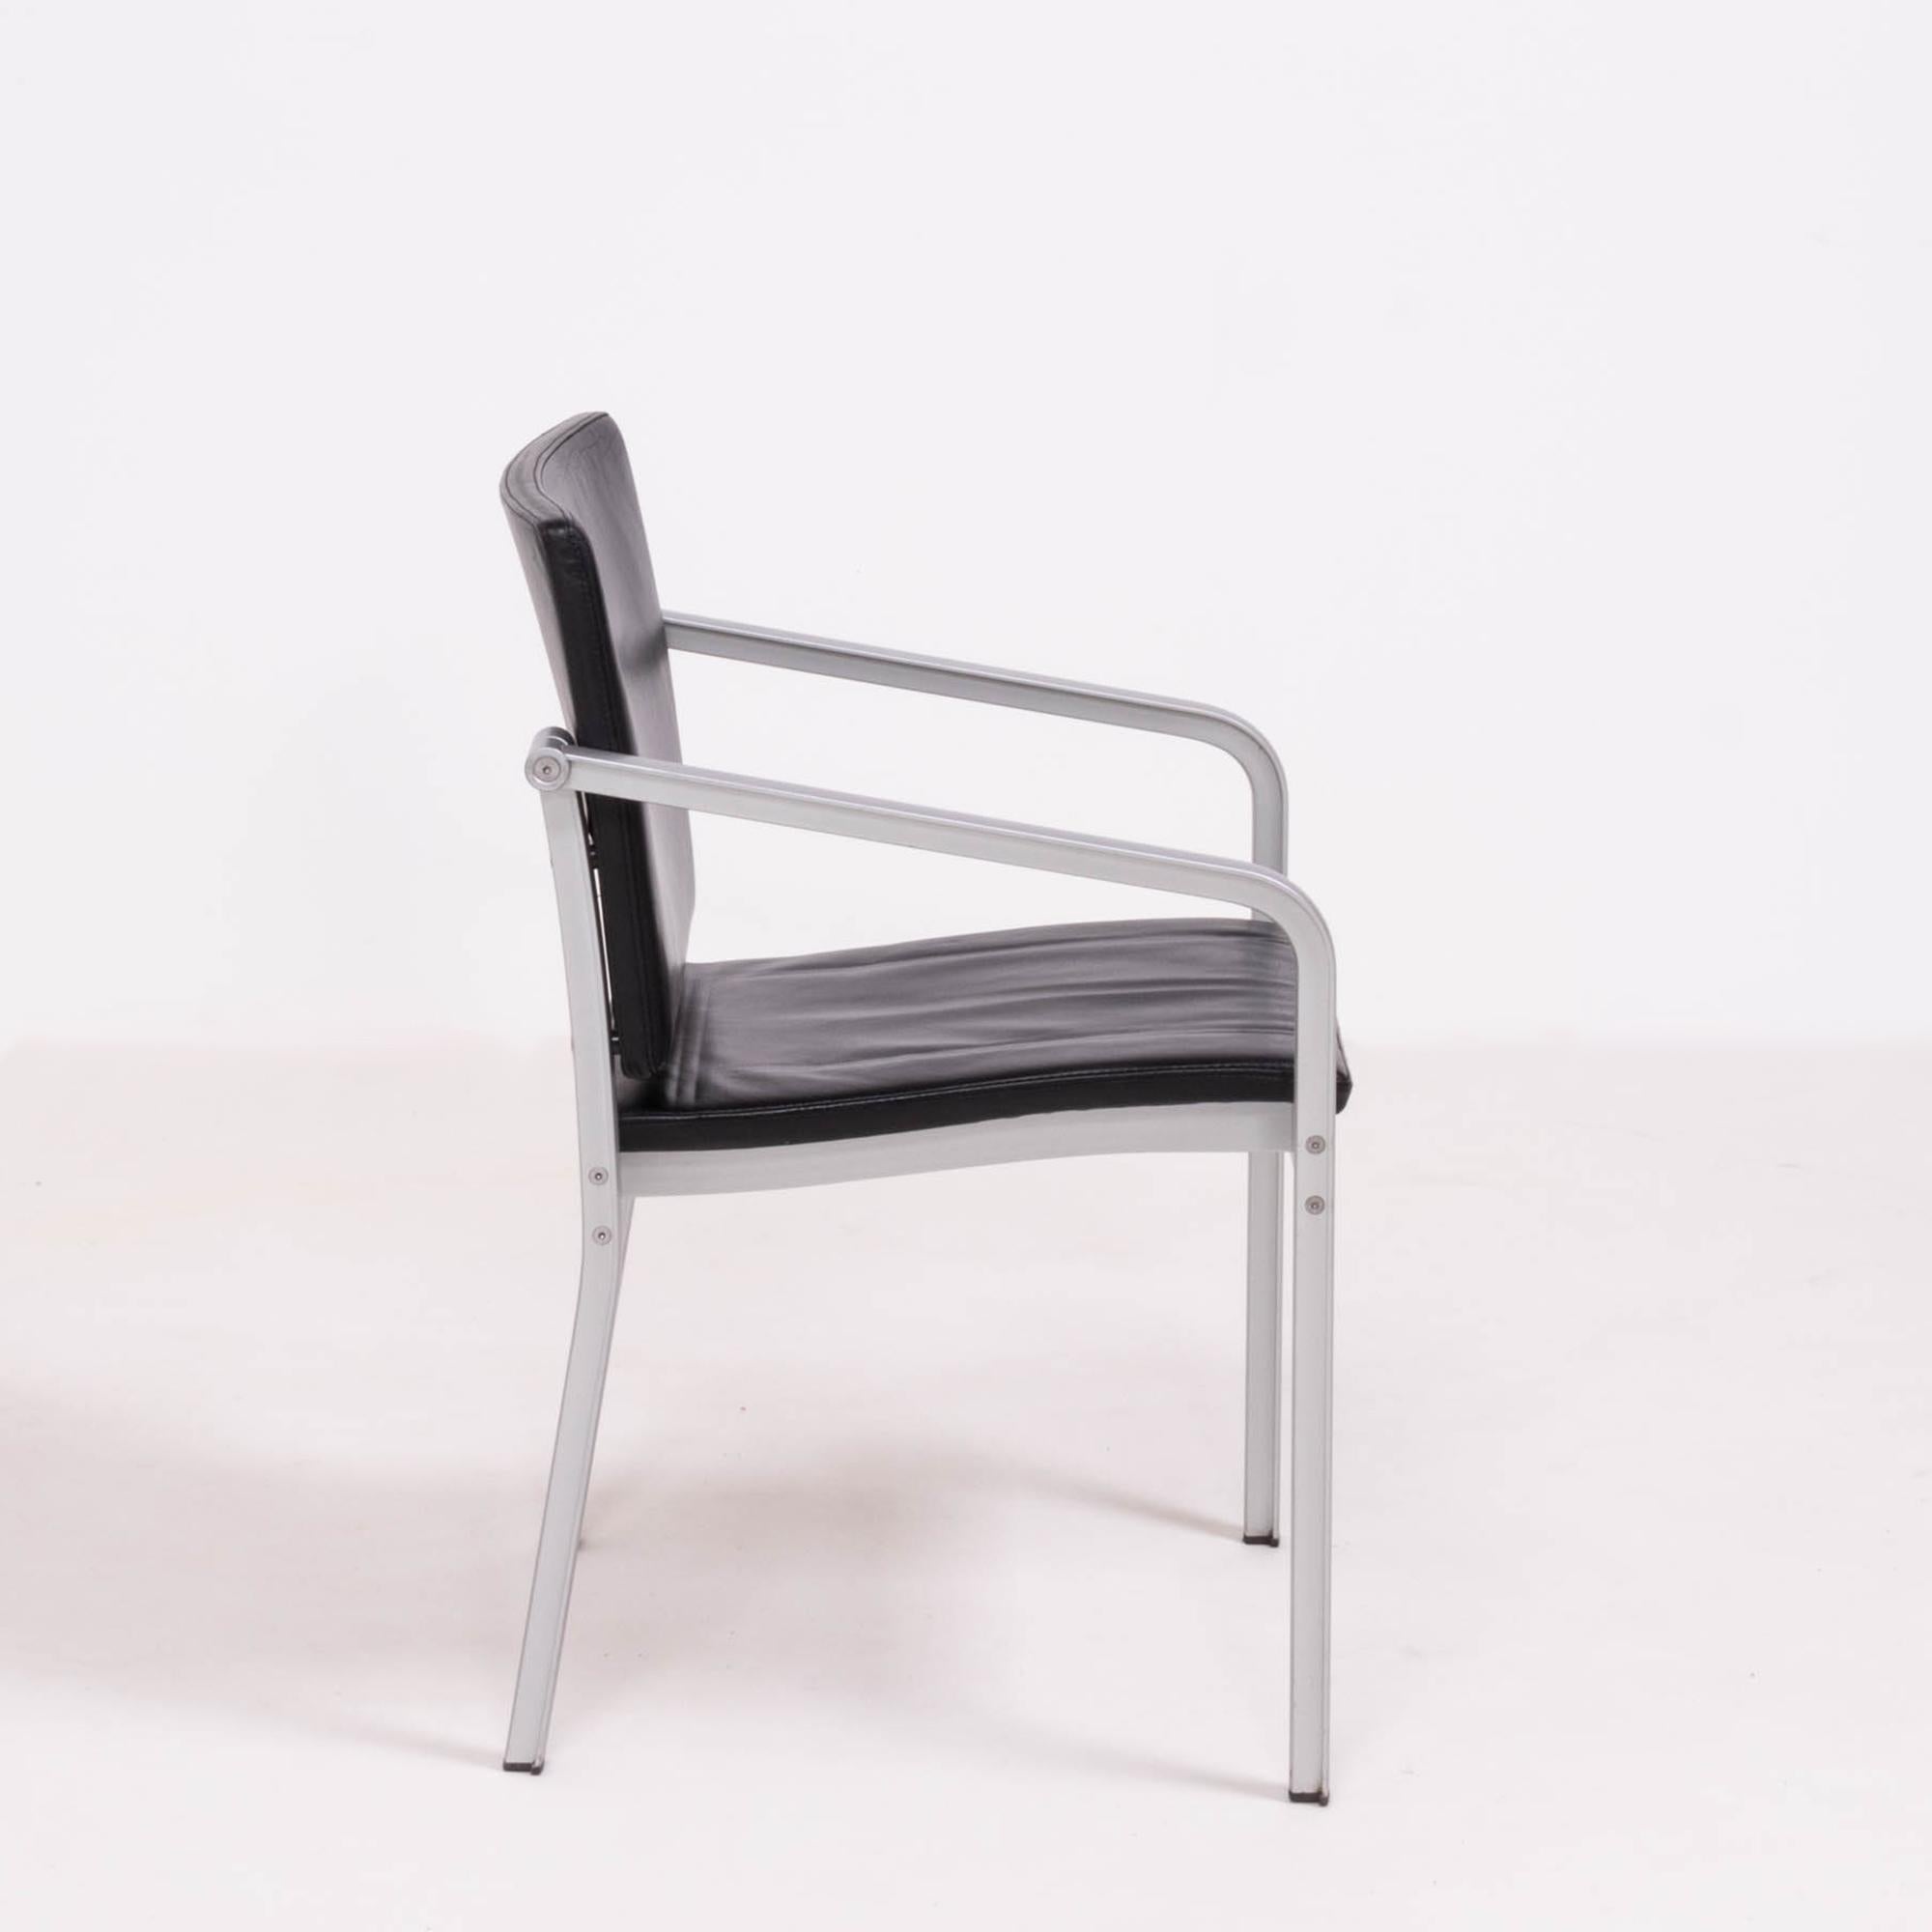 German A901 PF Aluminum and Leather Dining Chairs by Norman Foster for Thonet, 1999